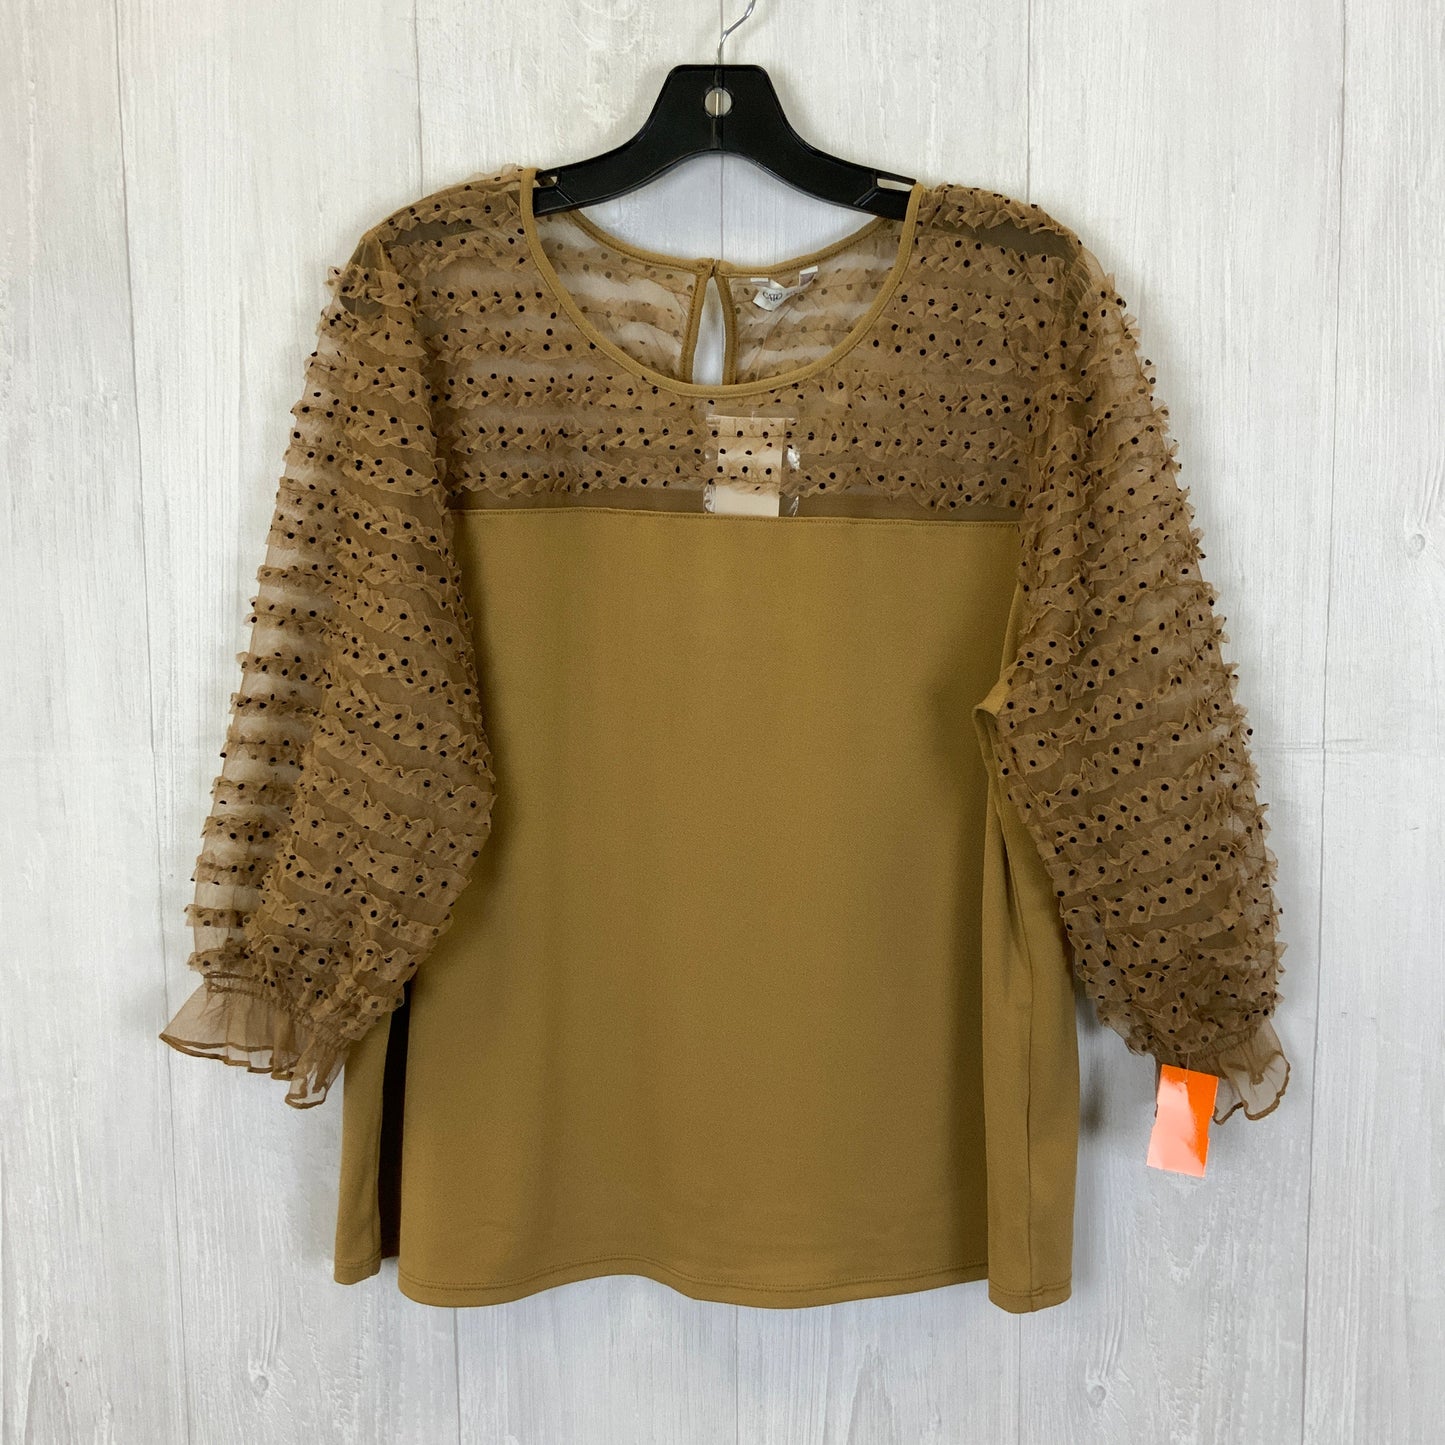 Tan Top 3/4 Sleeve Cato, Size Xl